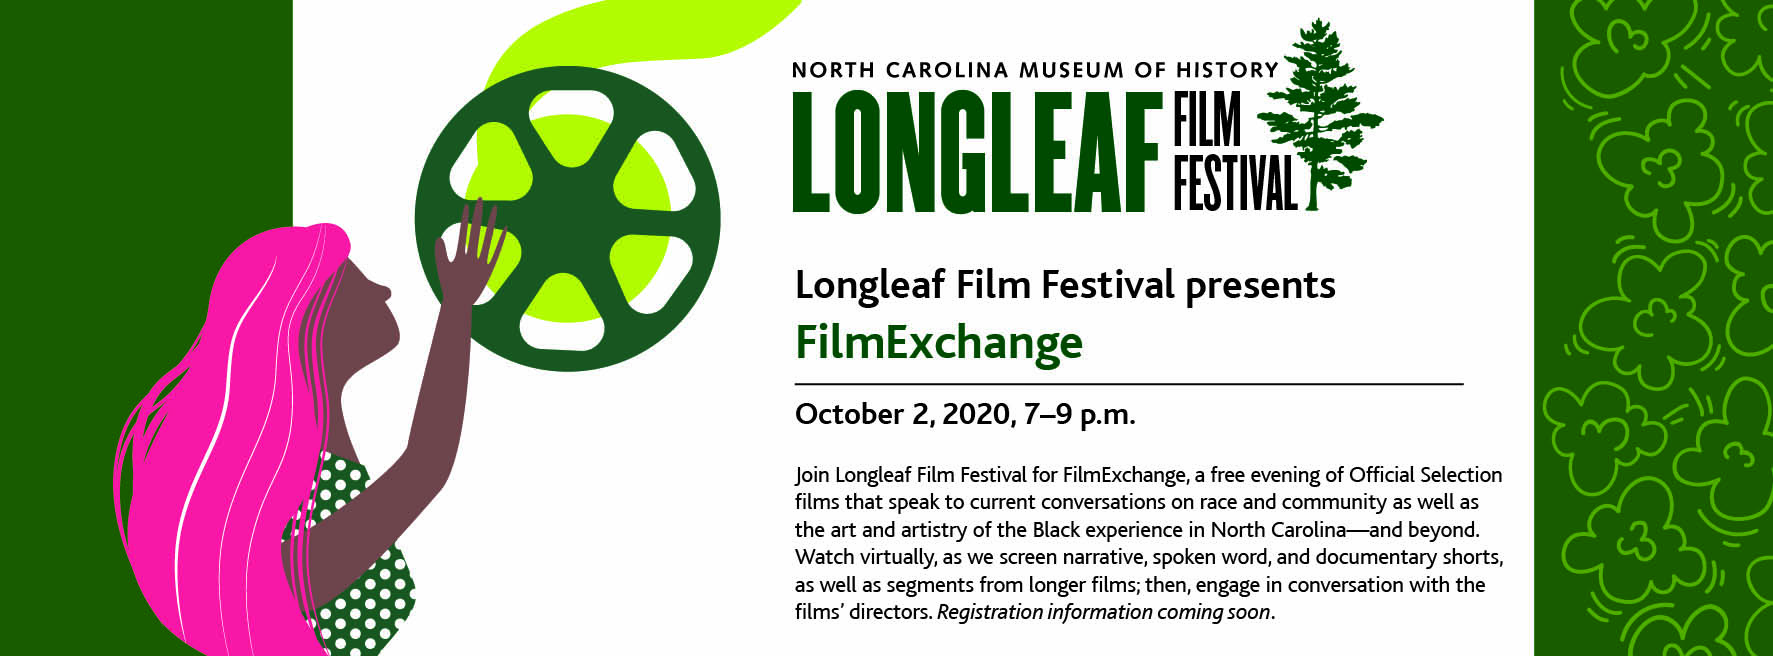 2020 Longleaf Film Festival Special Event: Film Exchange, a program that speaks to current conversations on race and community and the art and artistry of Black experience